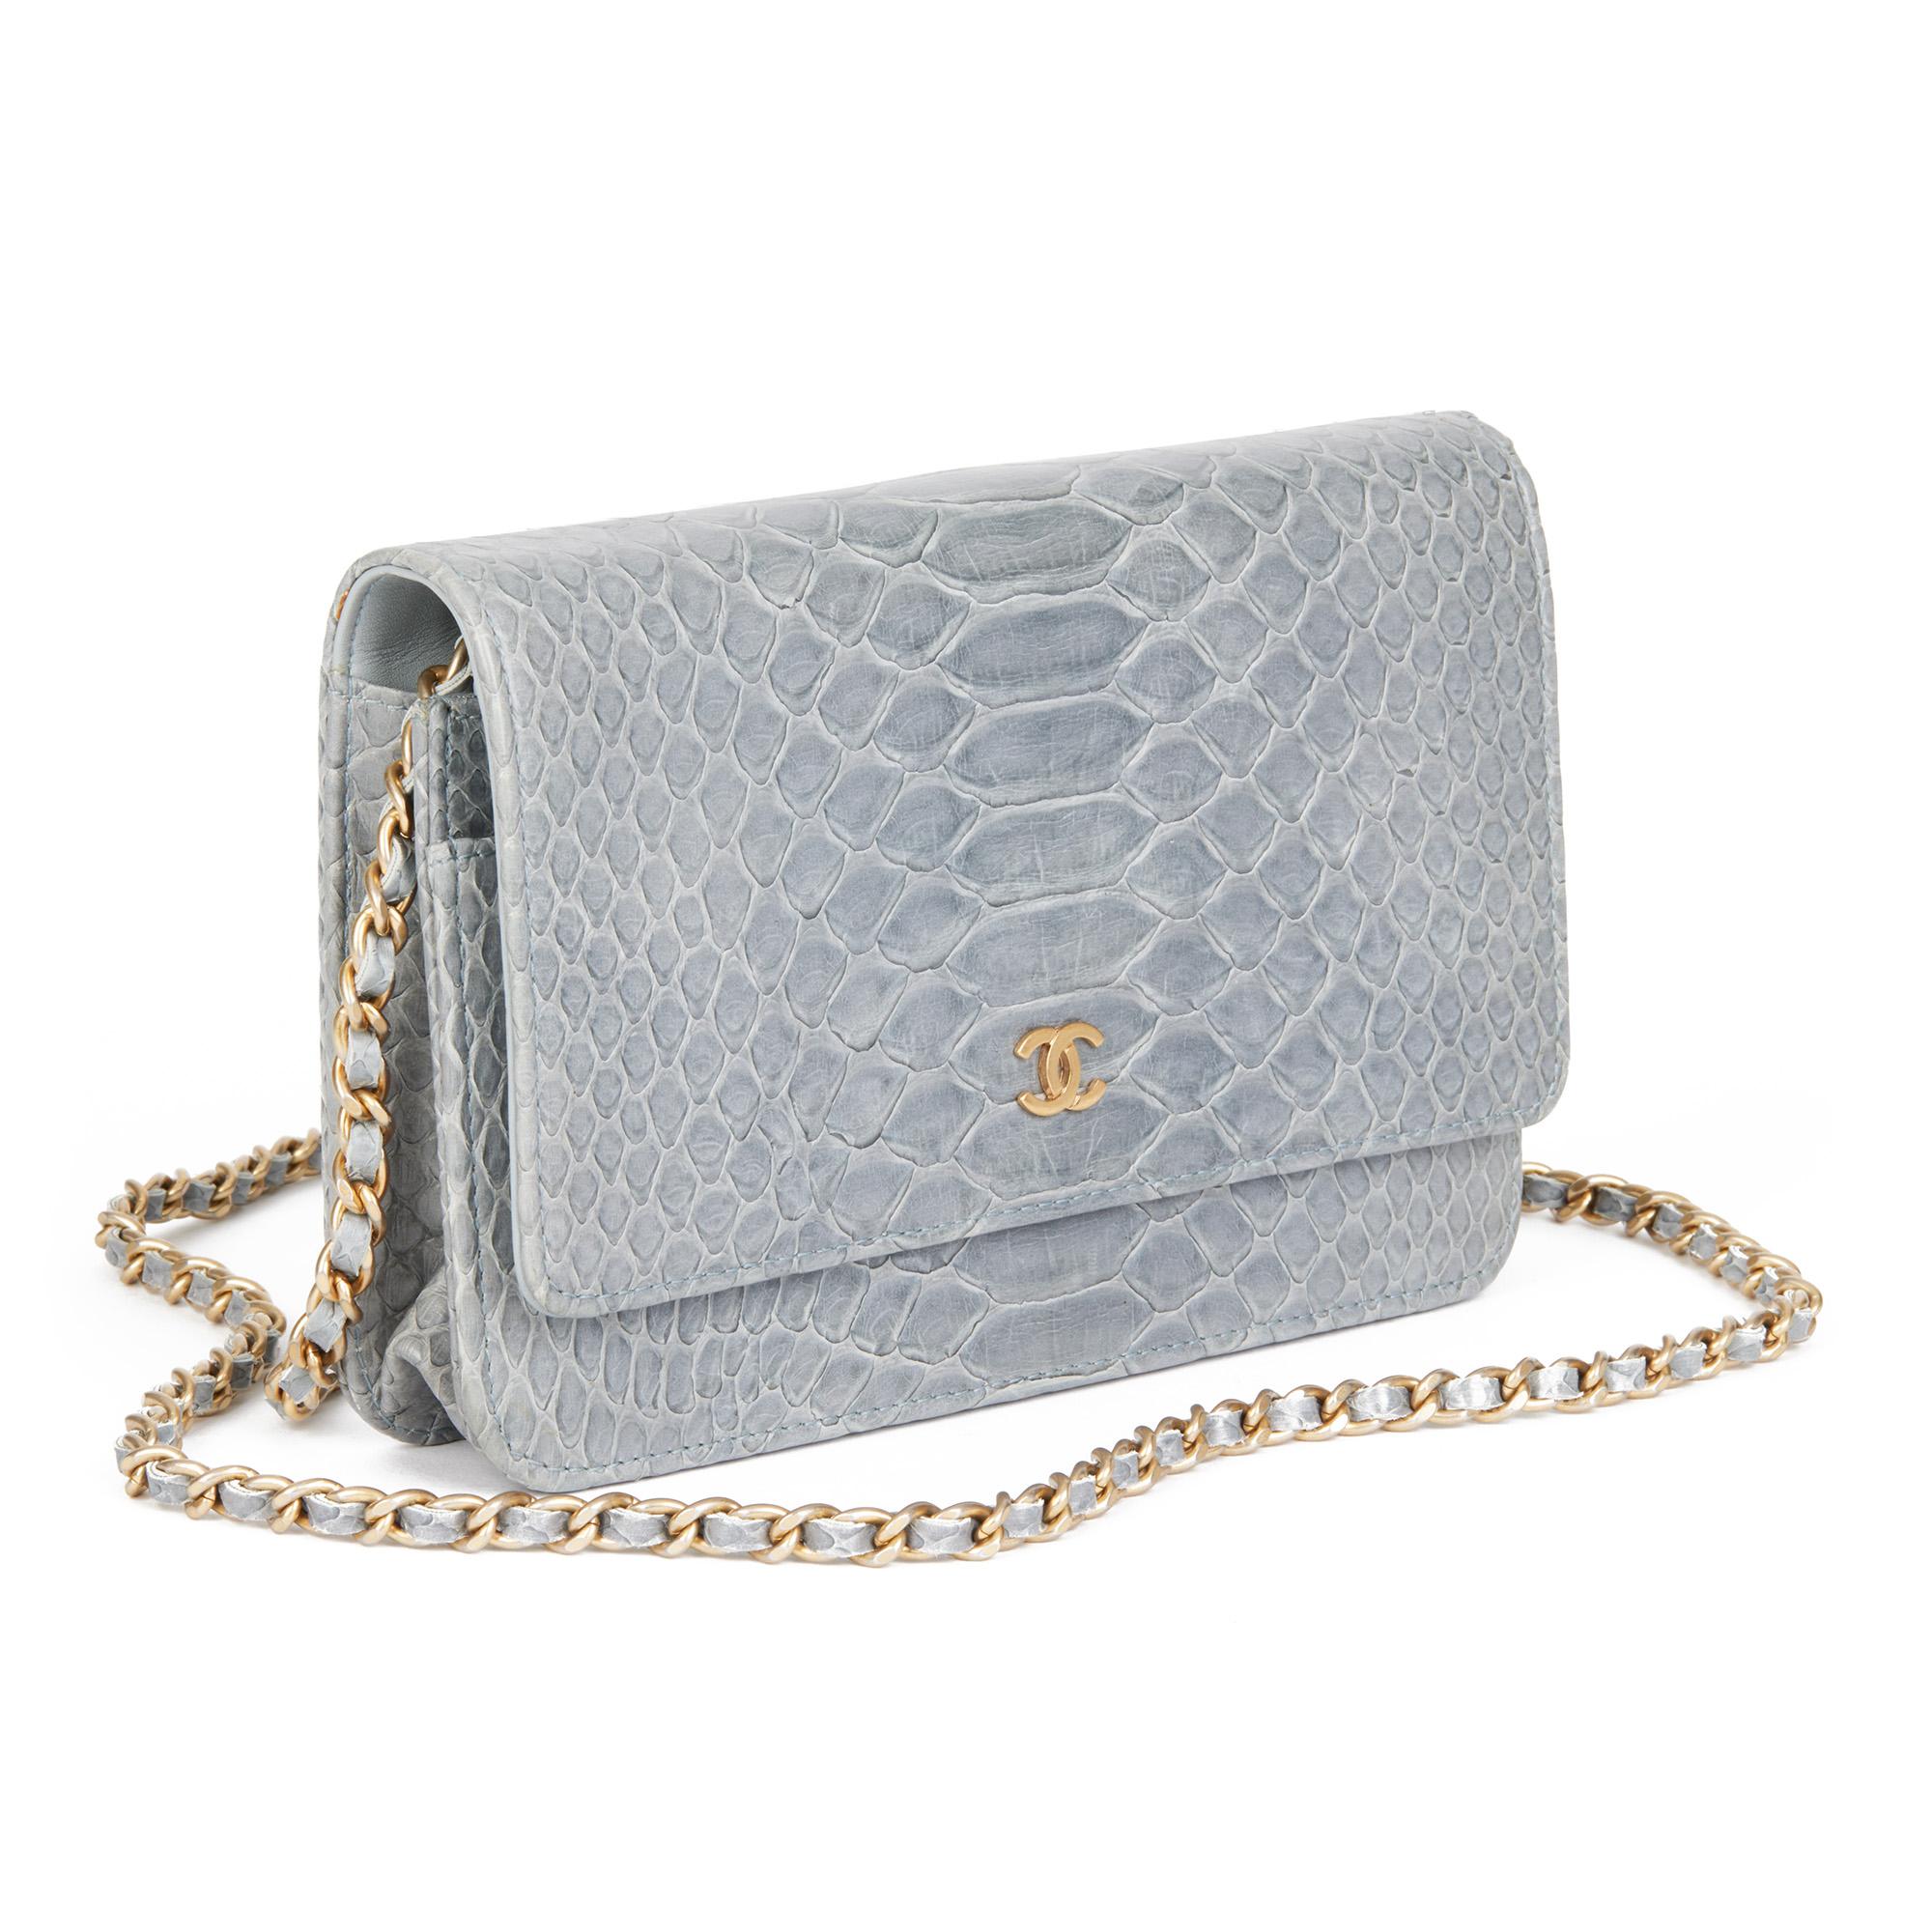 CHANEL
Grey Python Leather Wallet-on-Chain WOC

Serial Number: 18631709
Age (Circa): 2014
Accompanied By: Chanel Dust Bag, Authenticity Card
Authenticity Details: Authenticity Card, Serial Sticker (Made in France)
Gender: Ladies
Type: Shoulder,